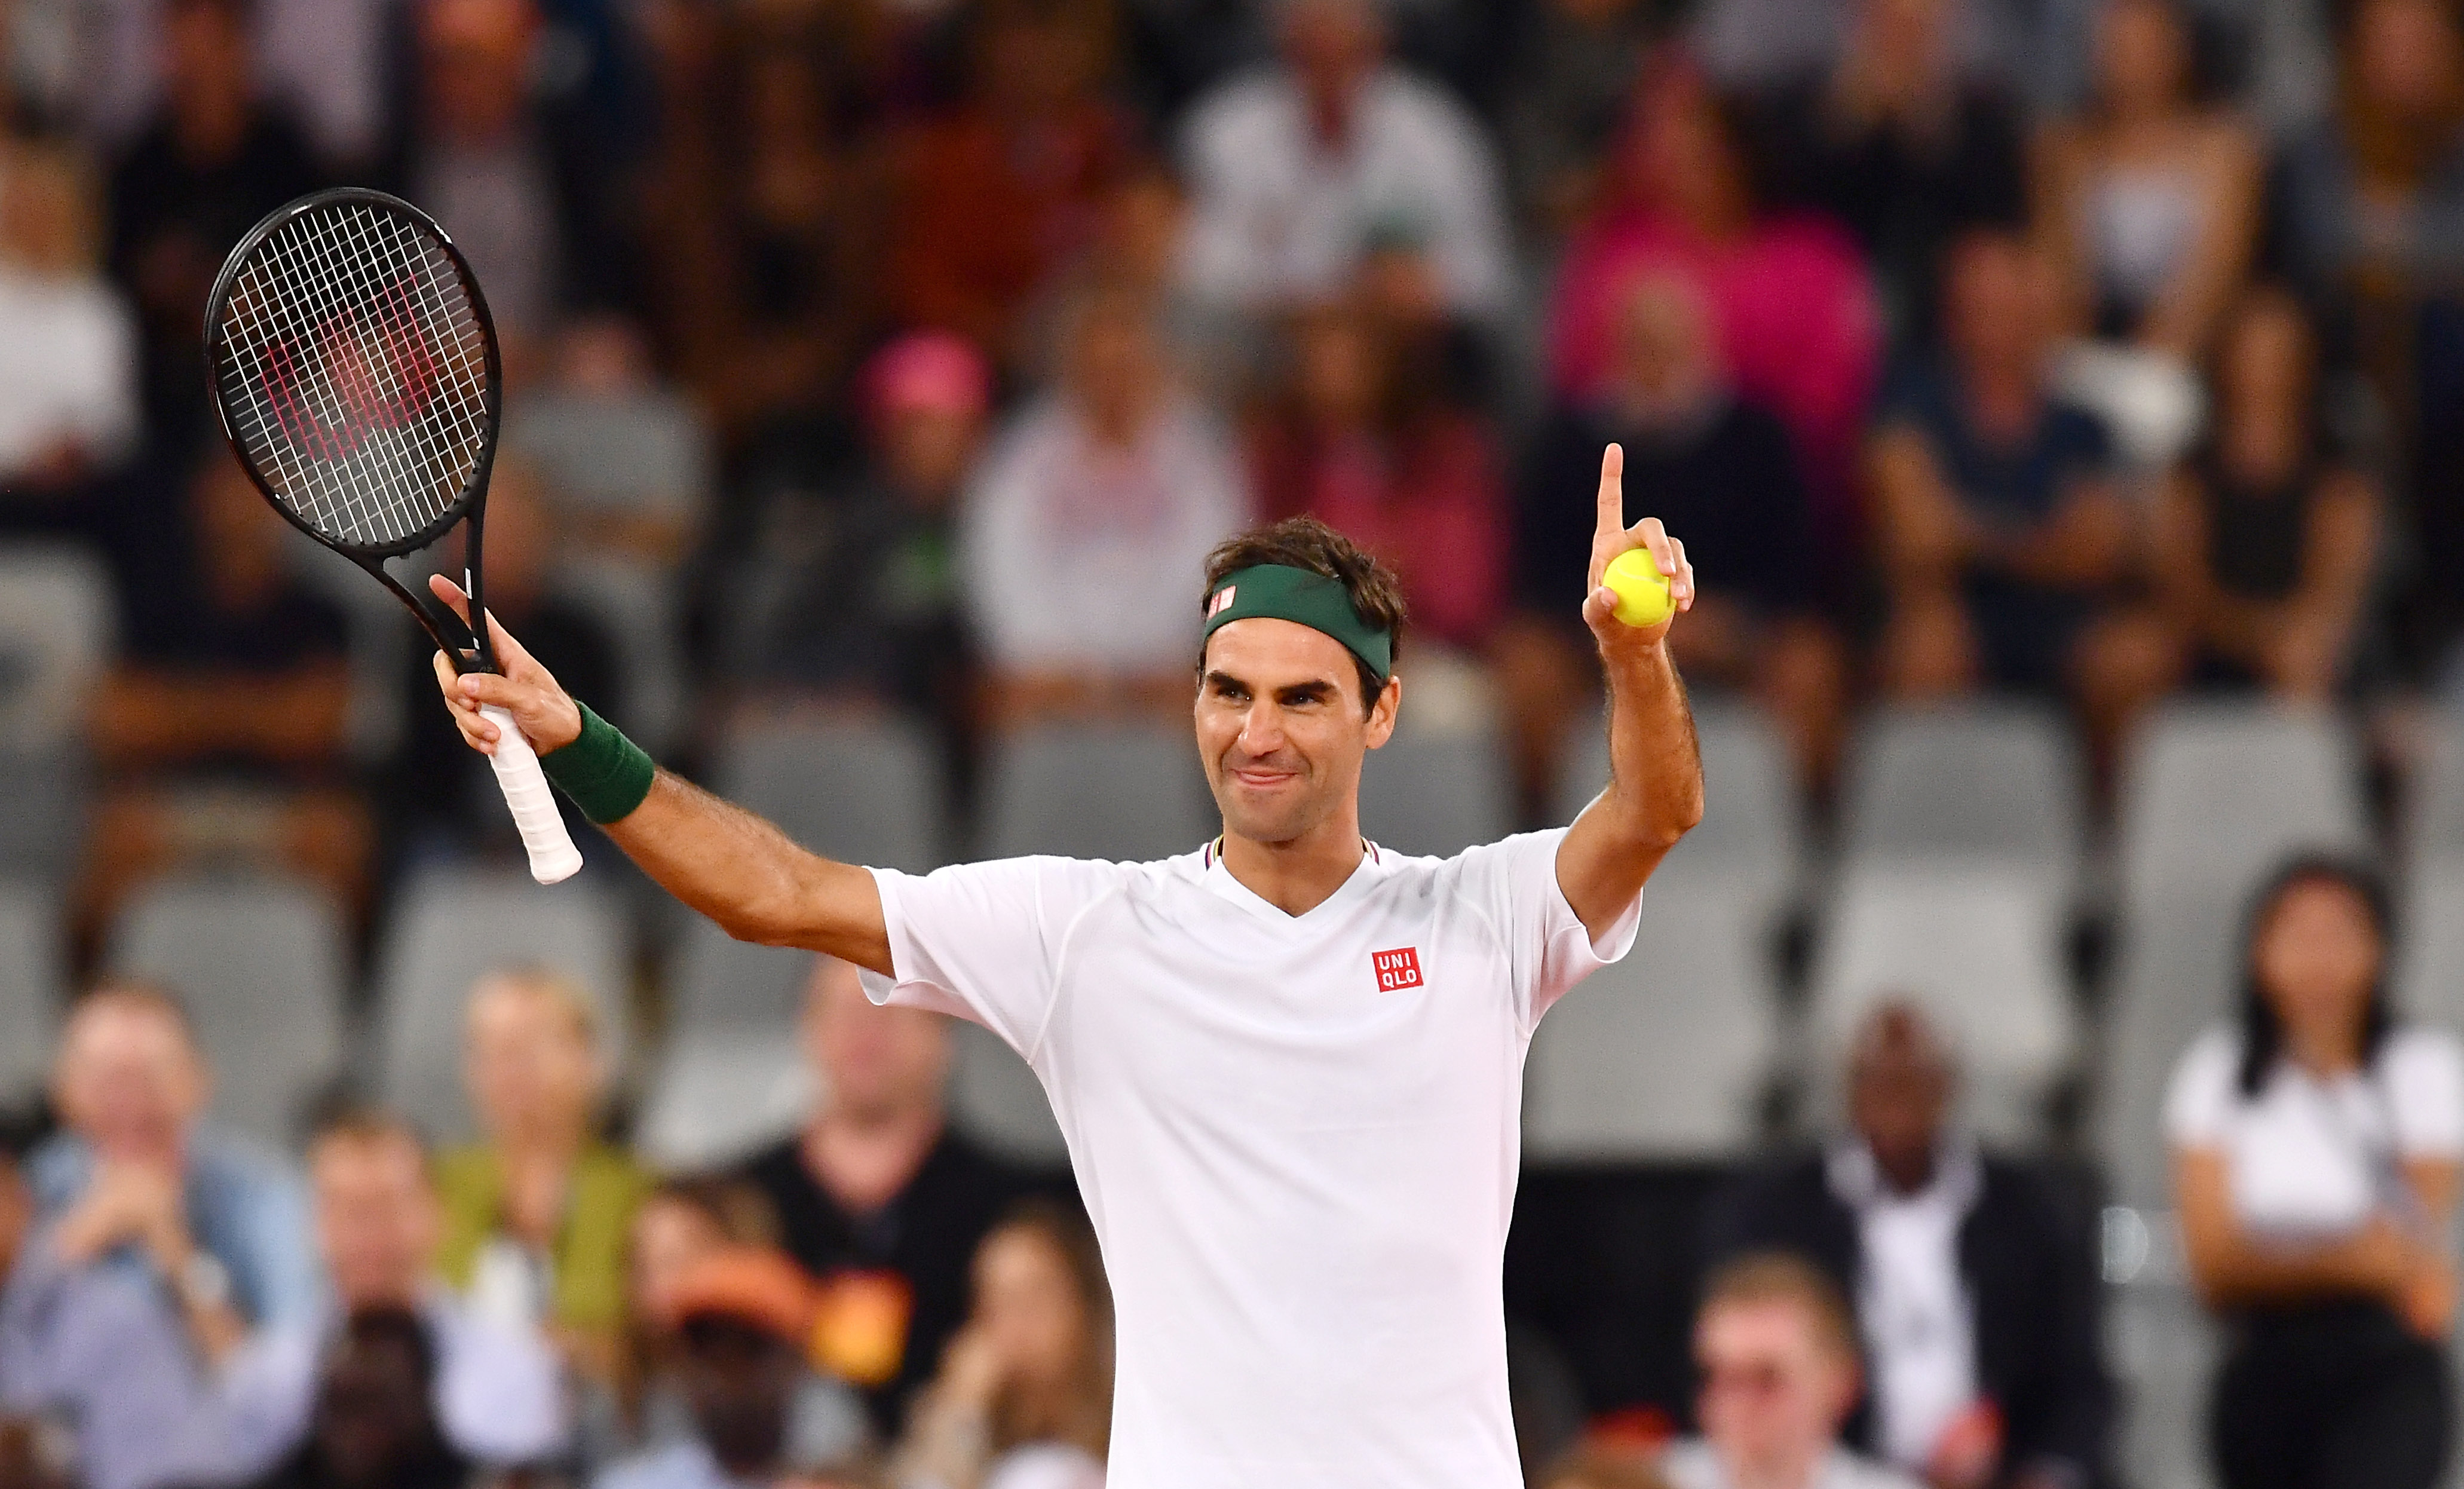 Roger Federer's net worth includes his partnership with UNIQLO, which he wears while playing this match.